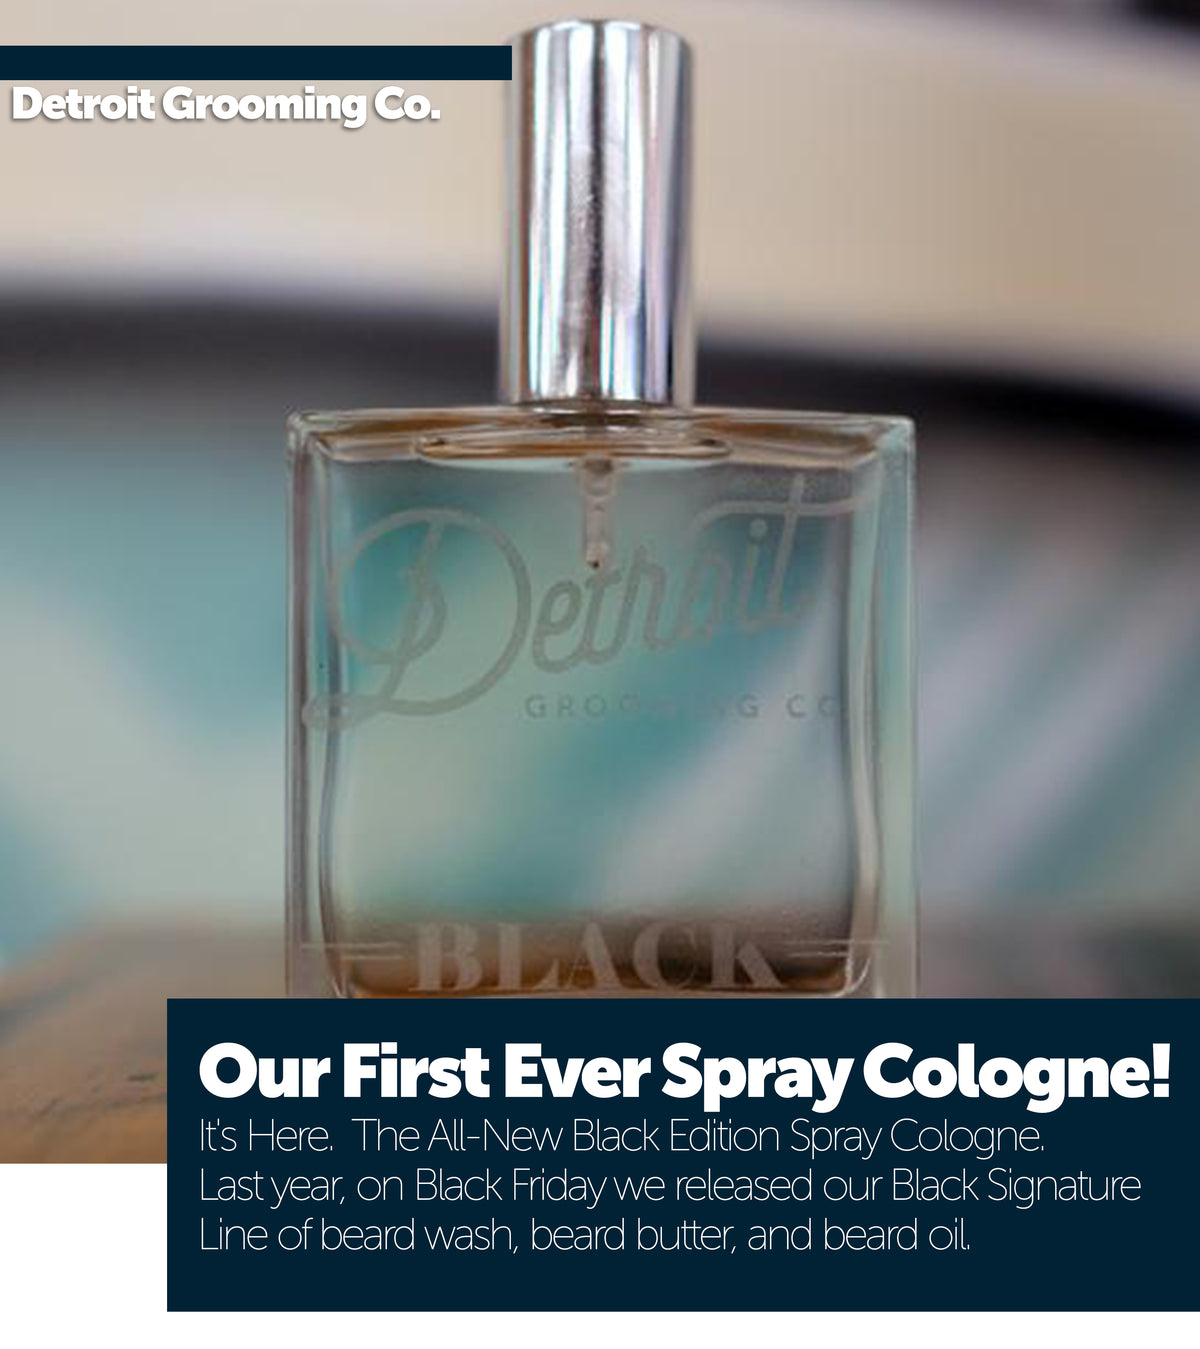 Our First Ever Spray Cologne!